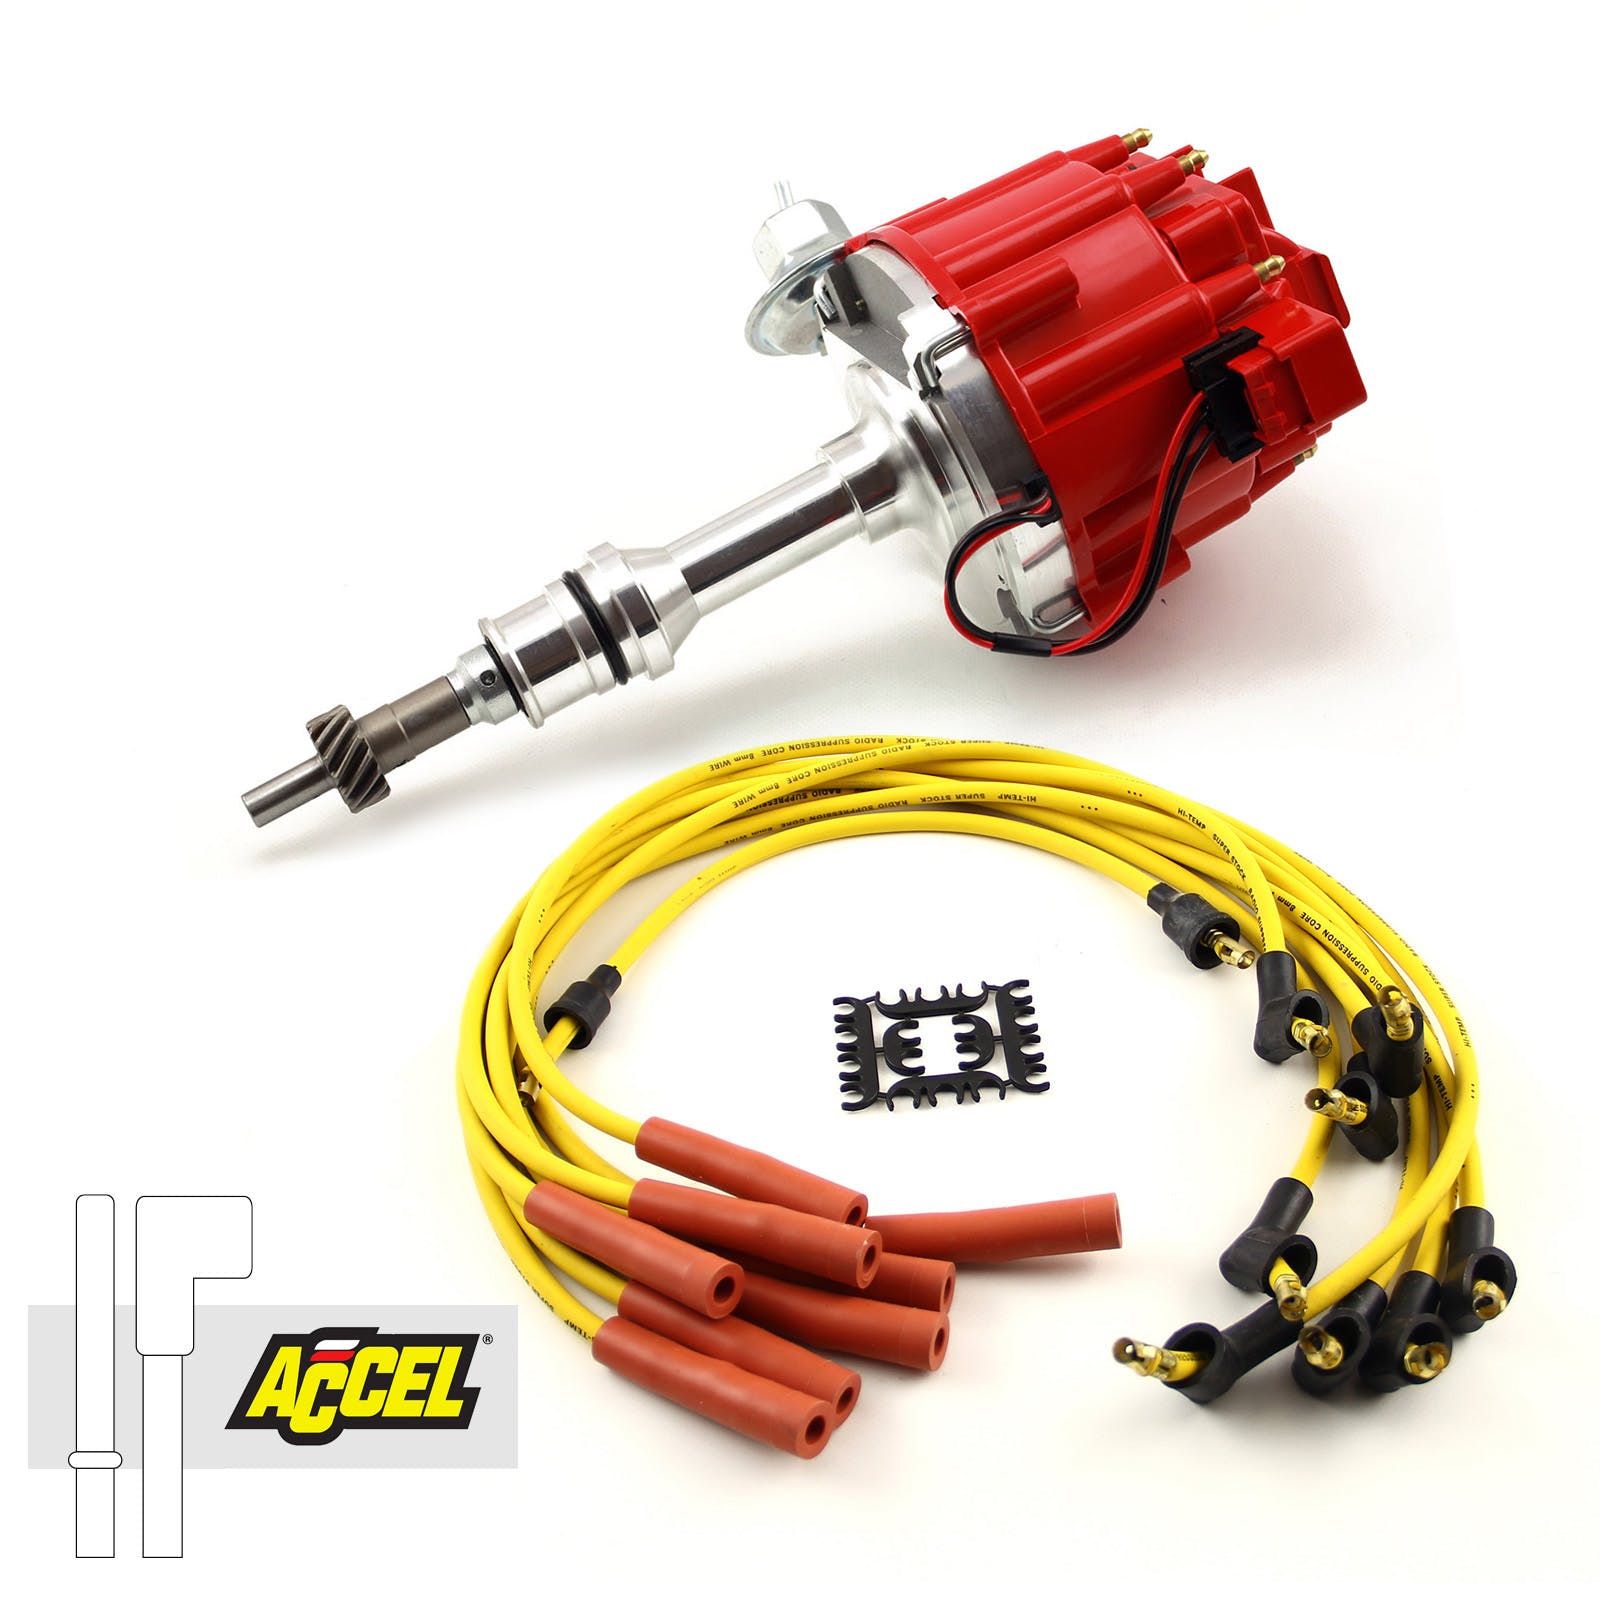 Speedmaster PCE385.1033 HEI Distributor Accel Spark Plug Wire Ignition Combo Kit